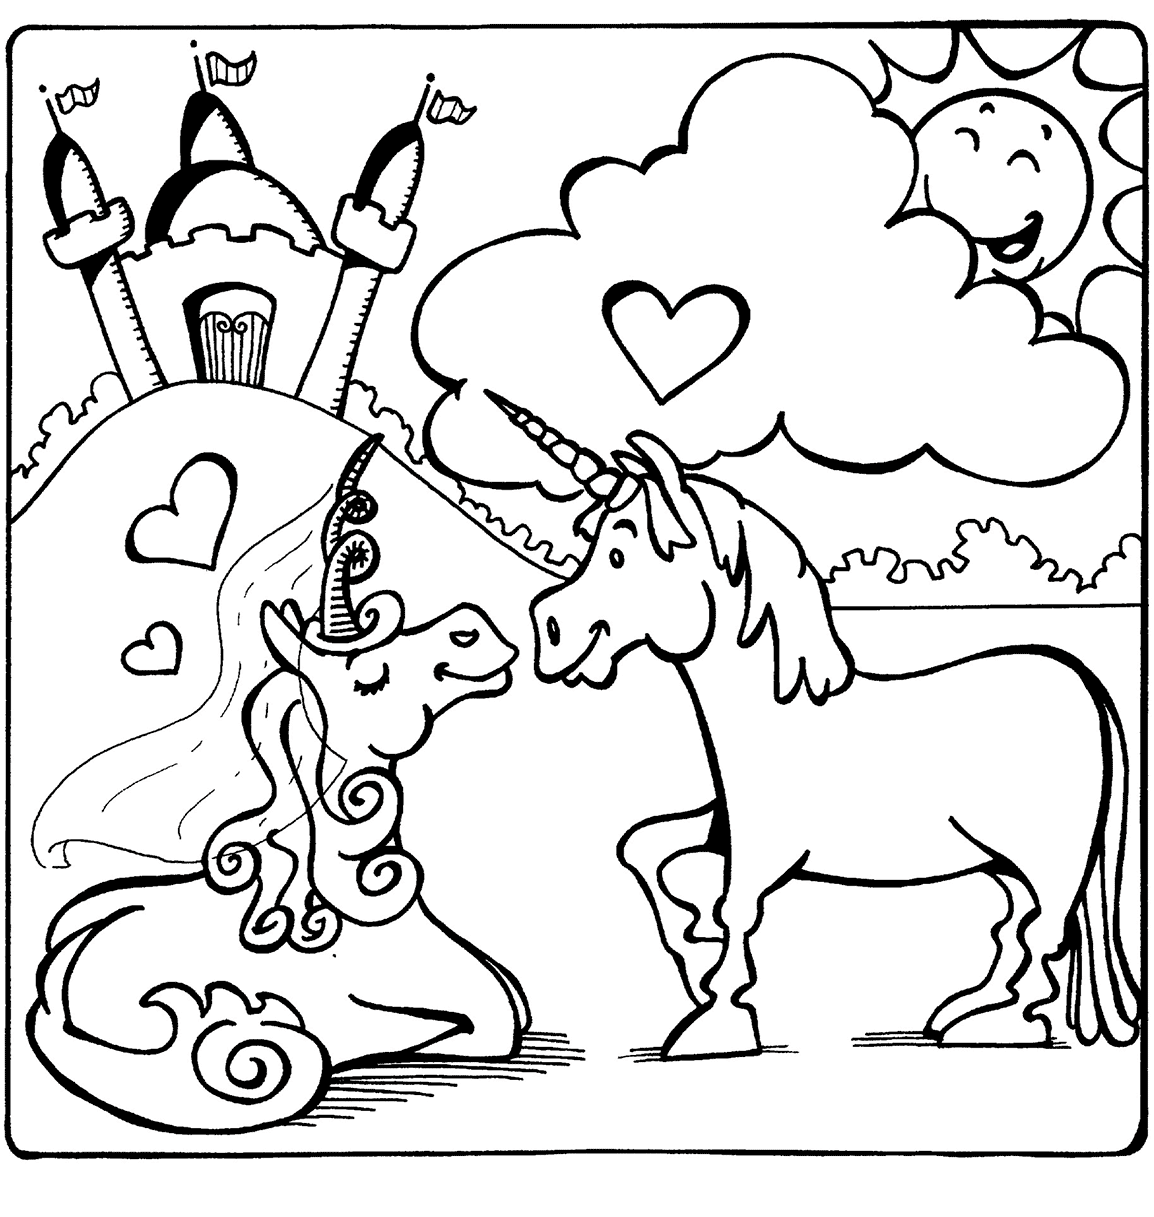 Unicorns In Love Coloring Page